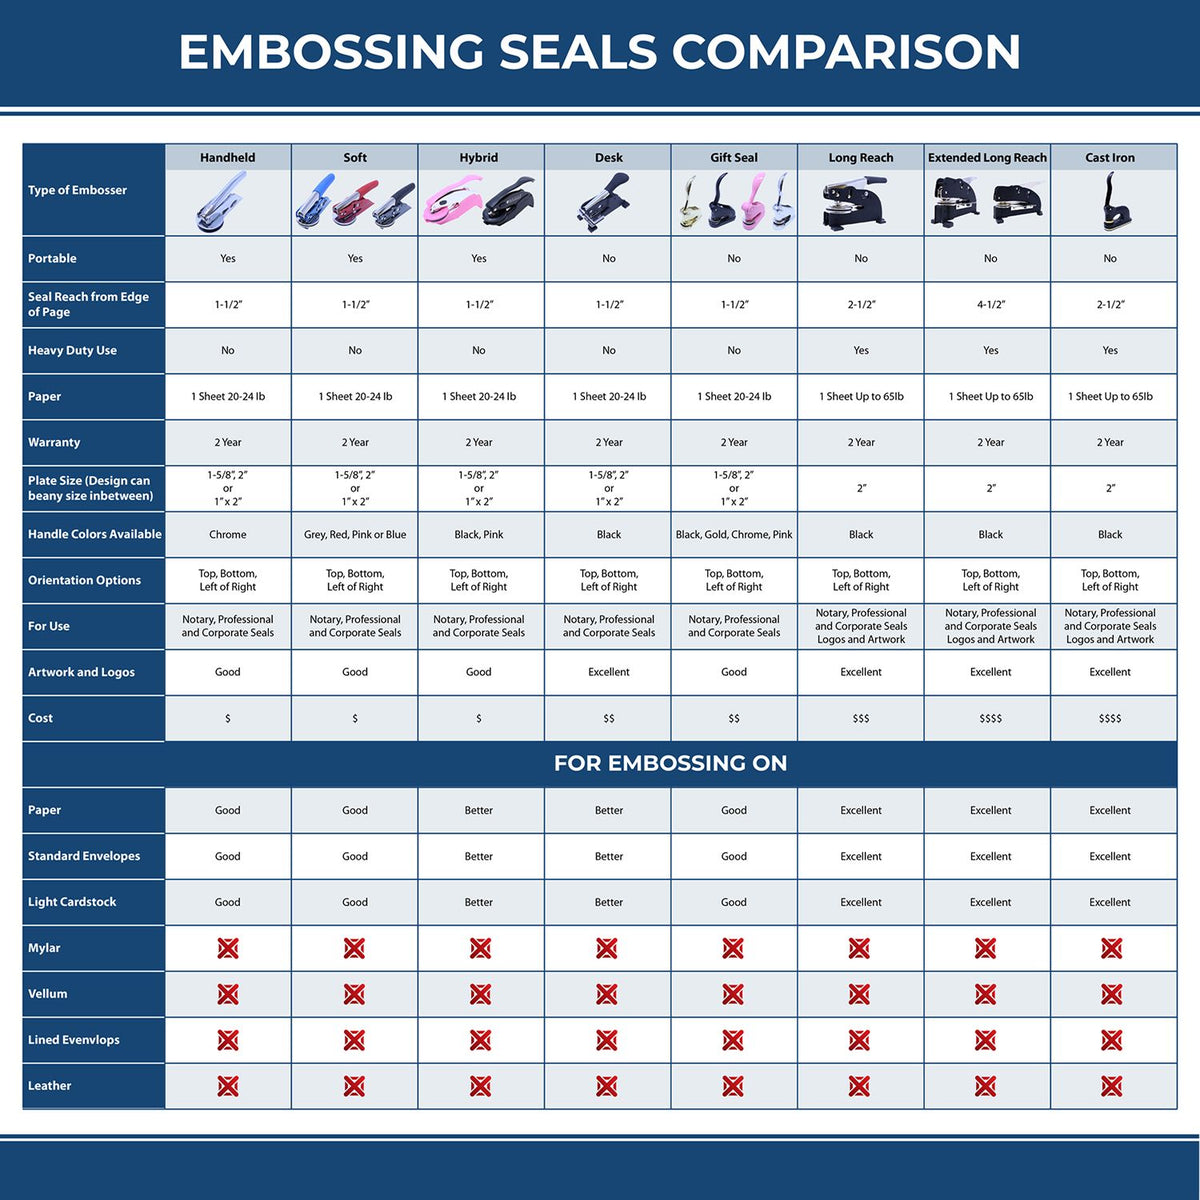 A comparison chart for the different types of mount models available for the State of Colorado Long Reach Architectural Embossing Seal.